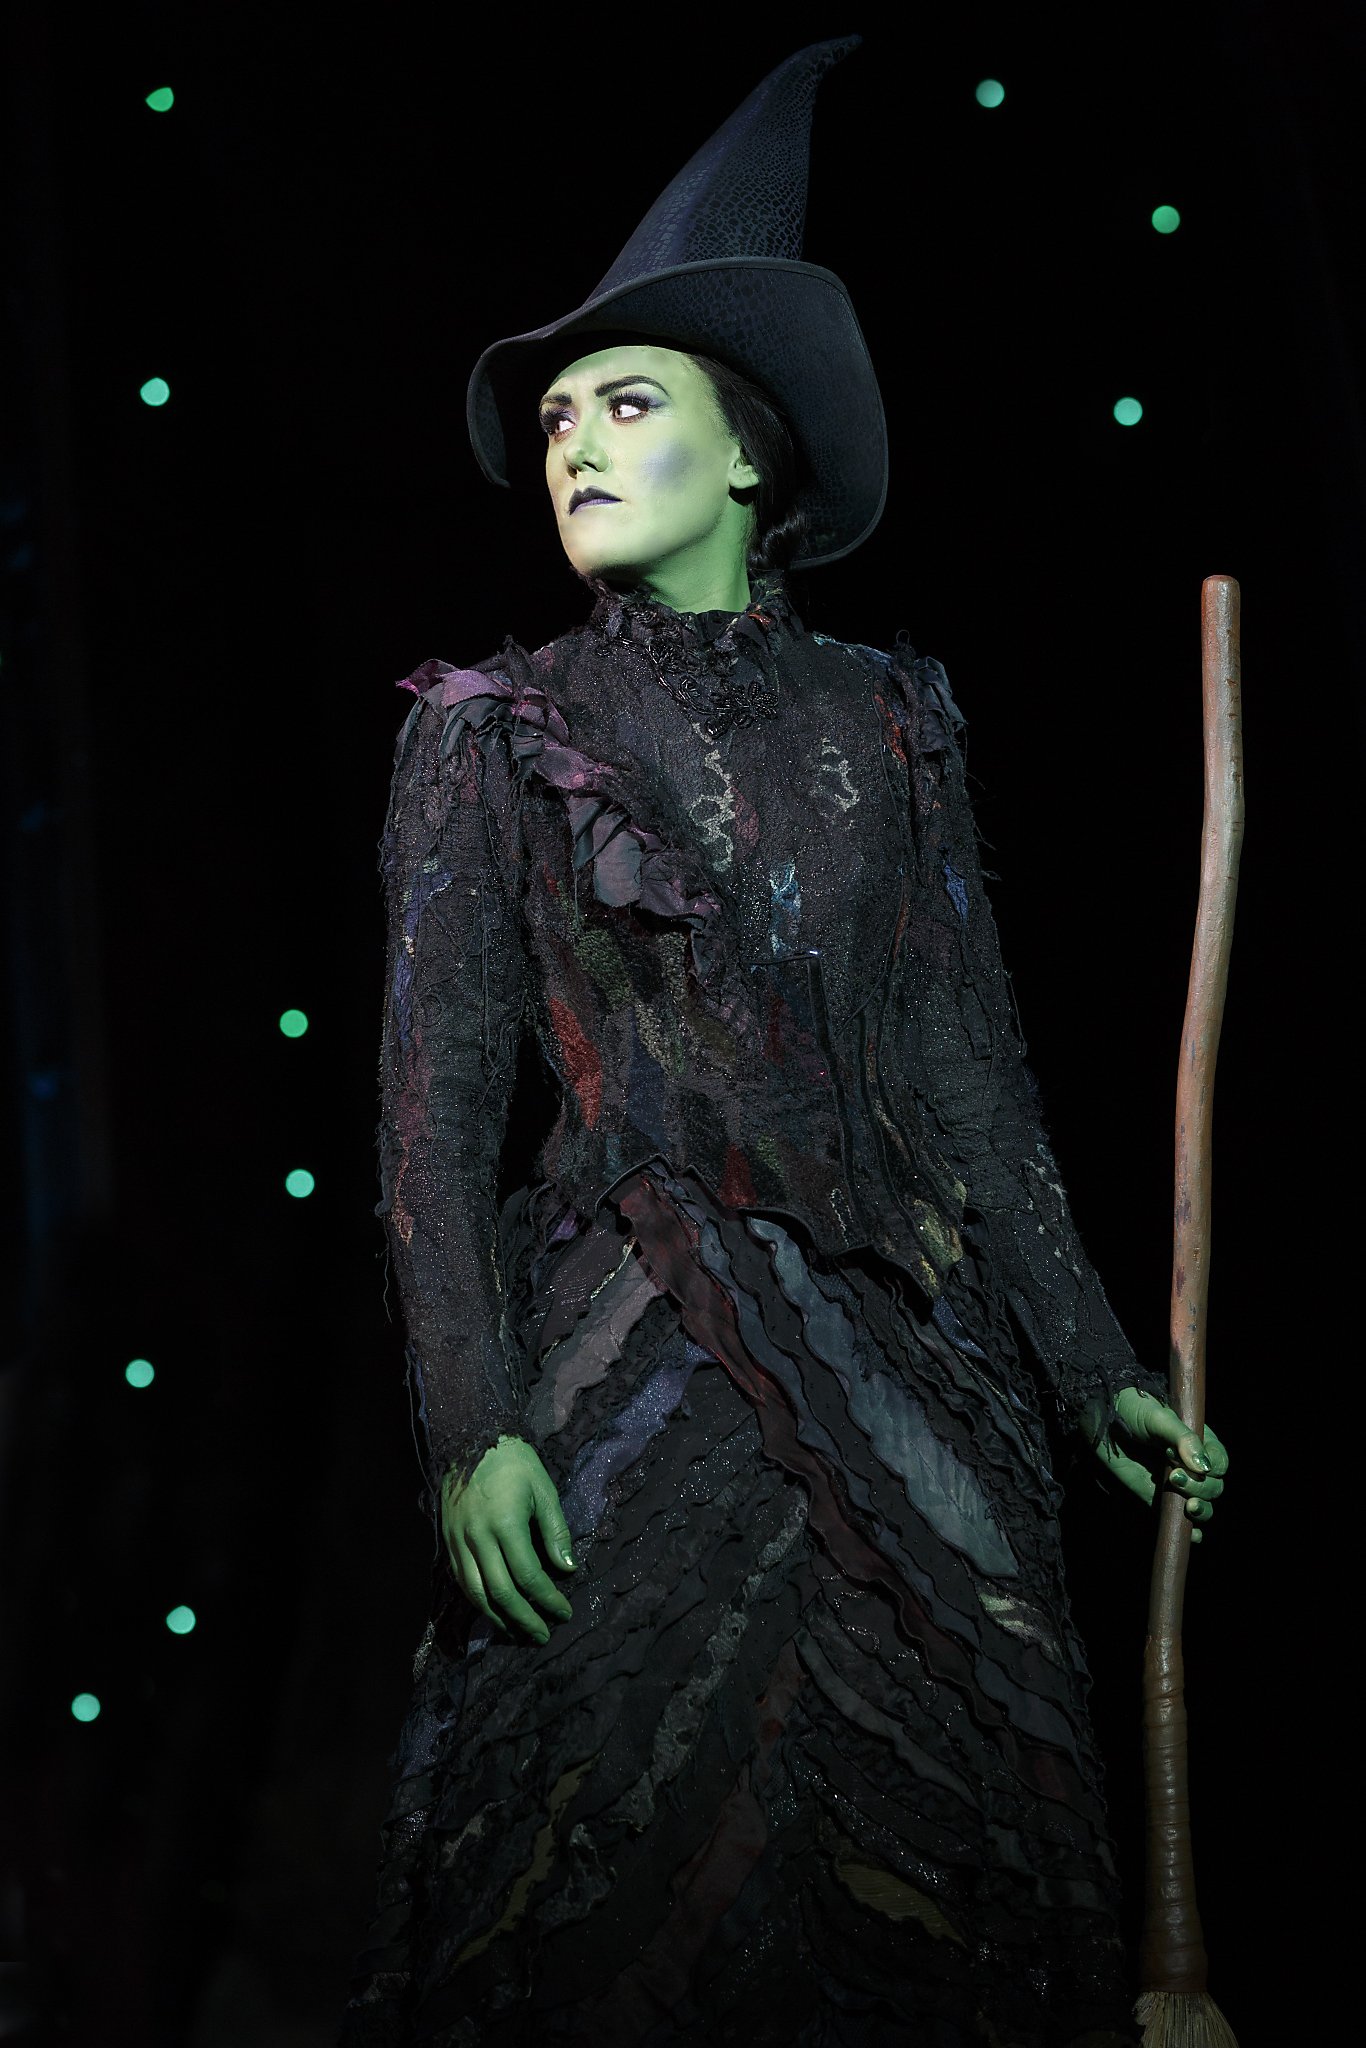 'Wicked' returns to San Francisco